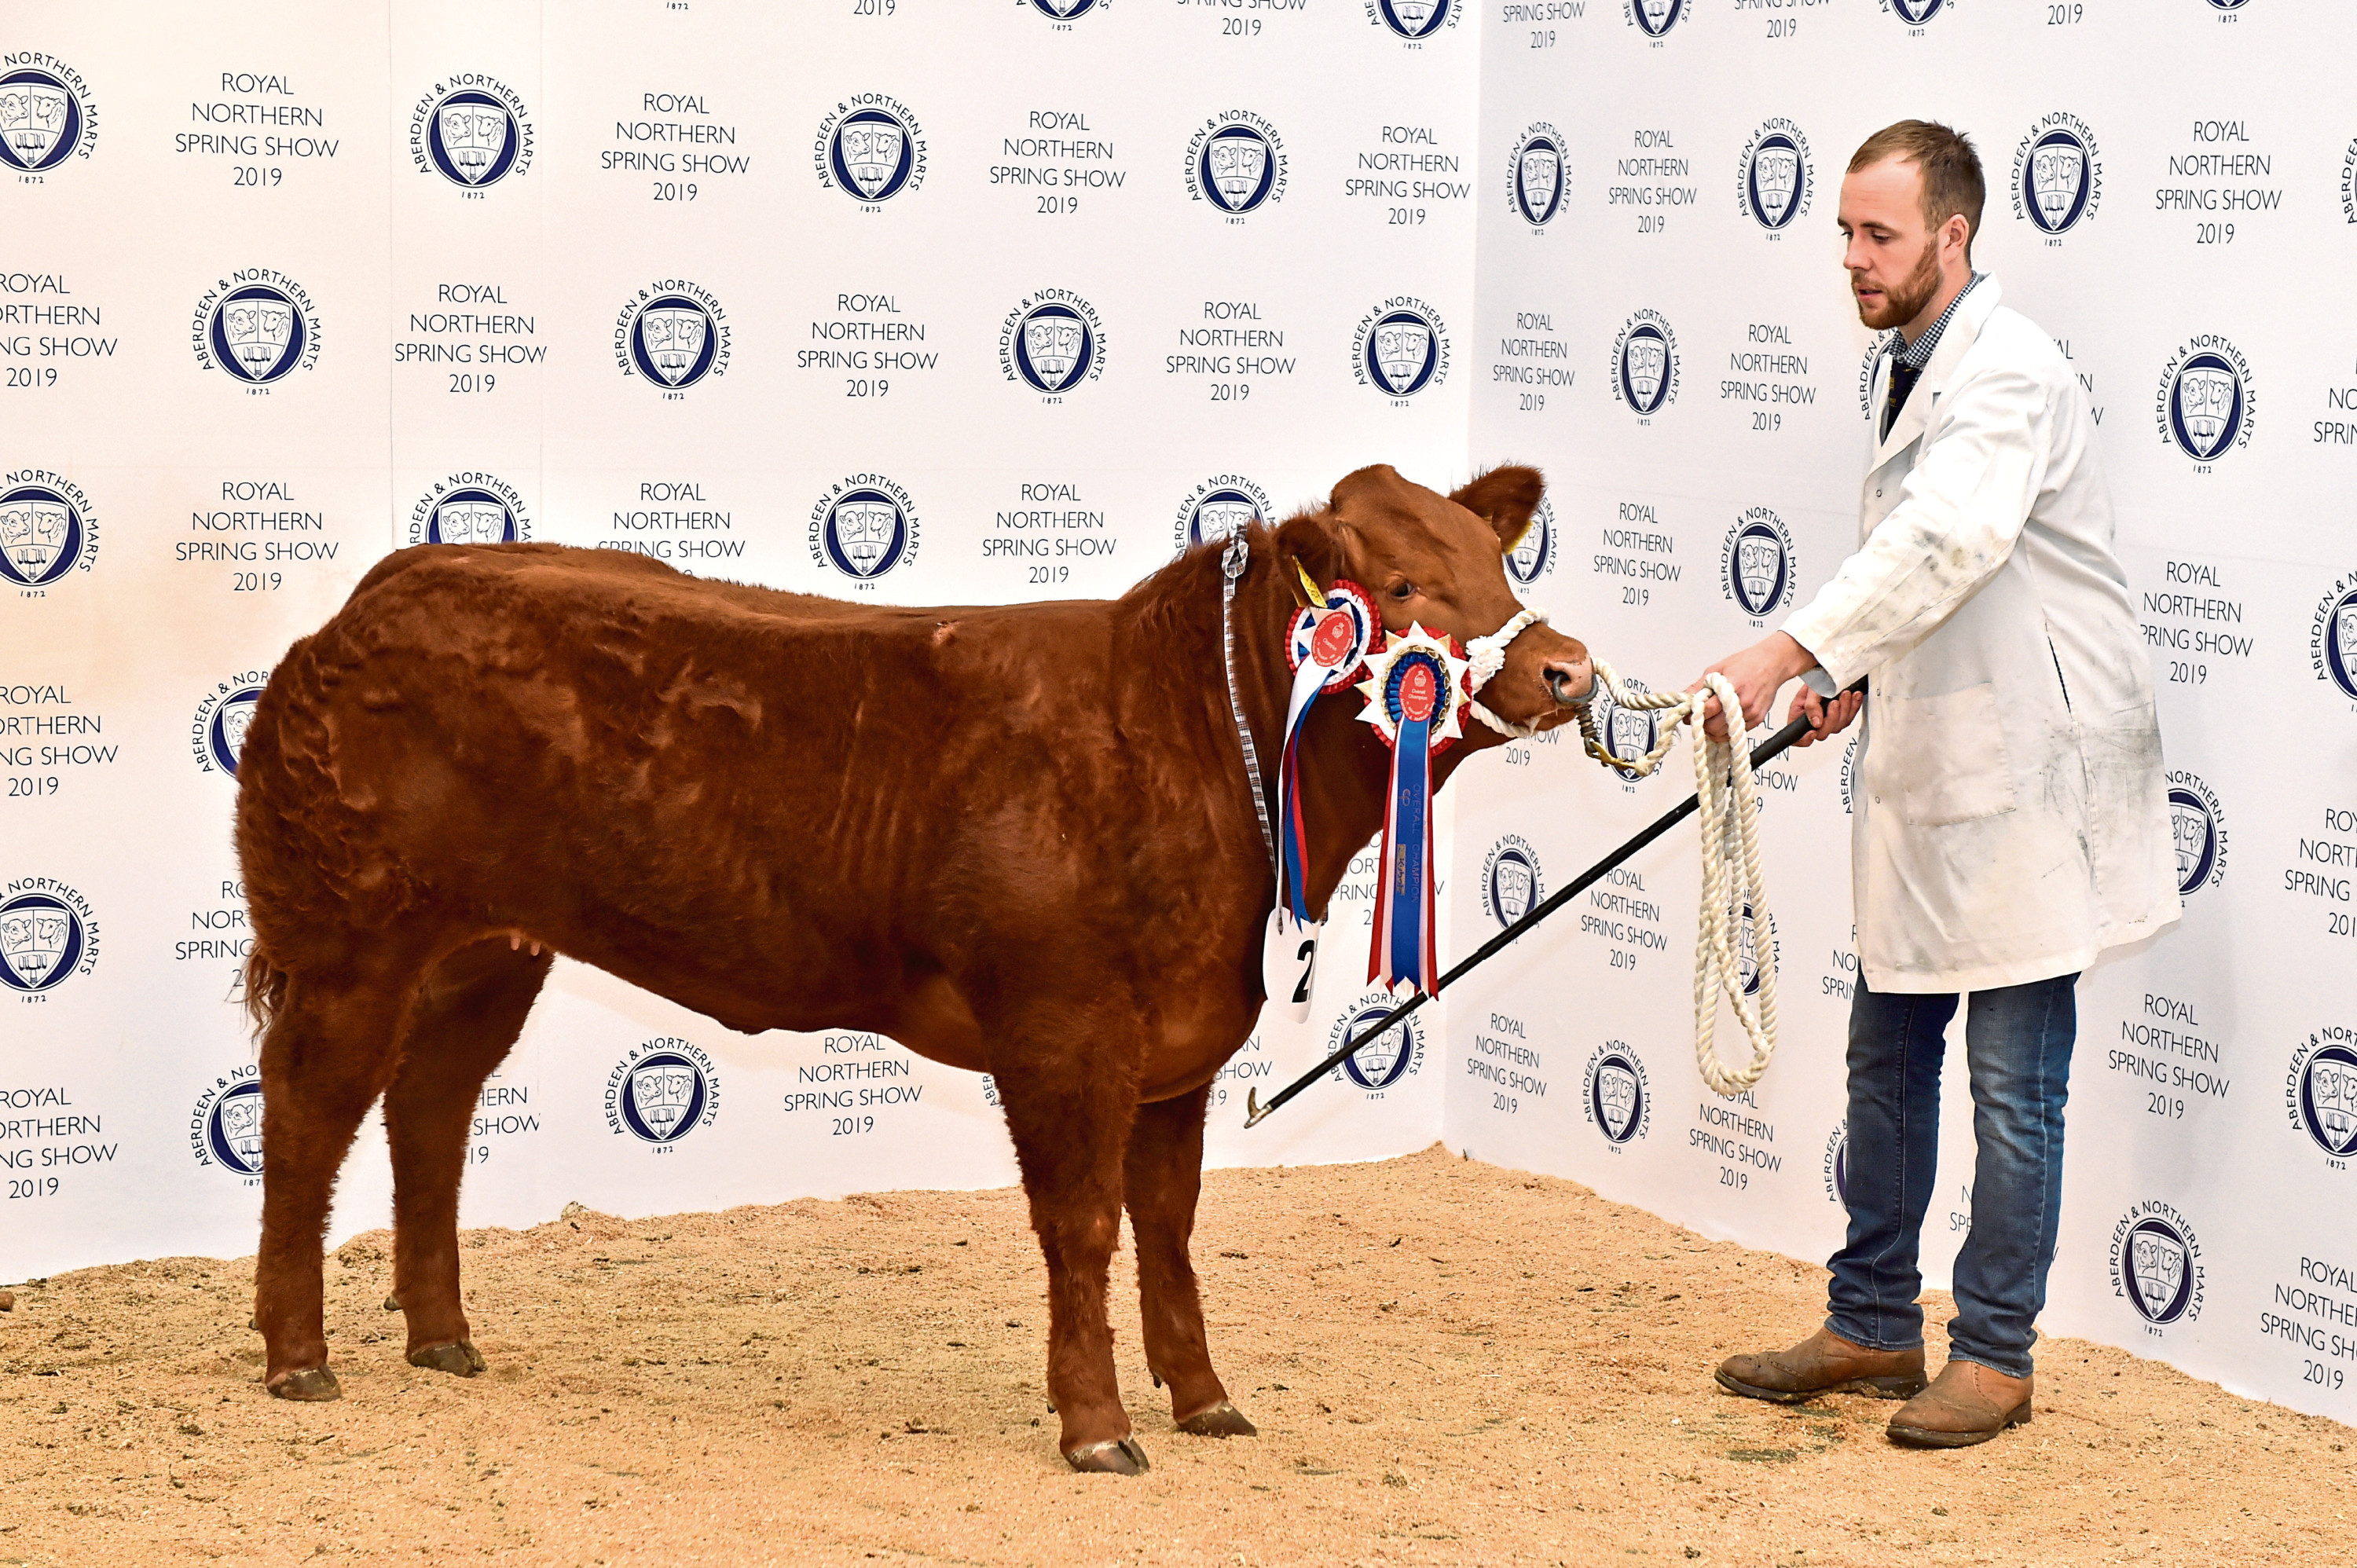 The overall champion exhibition calf topped the sale at £4,600.